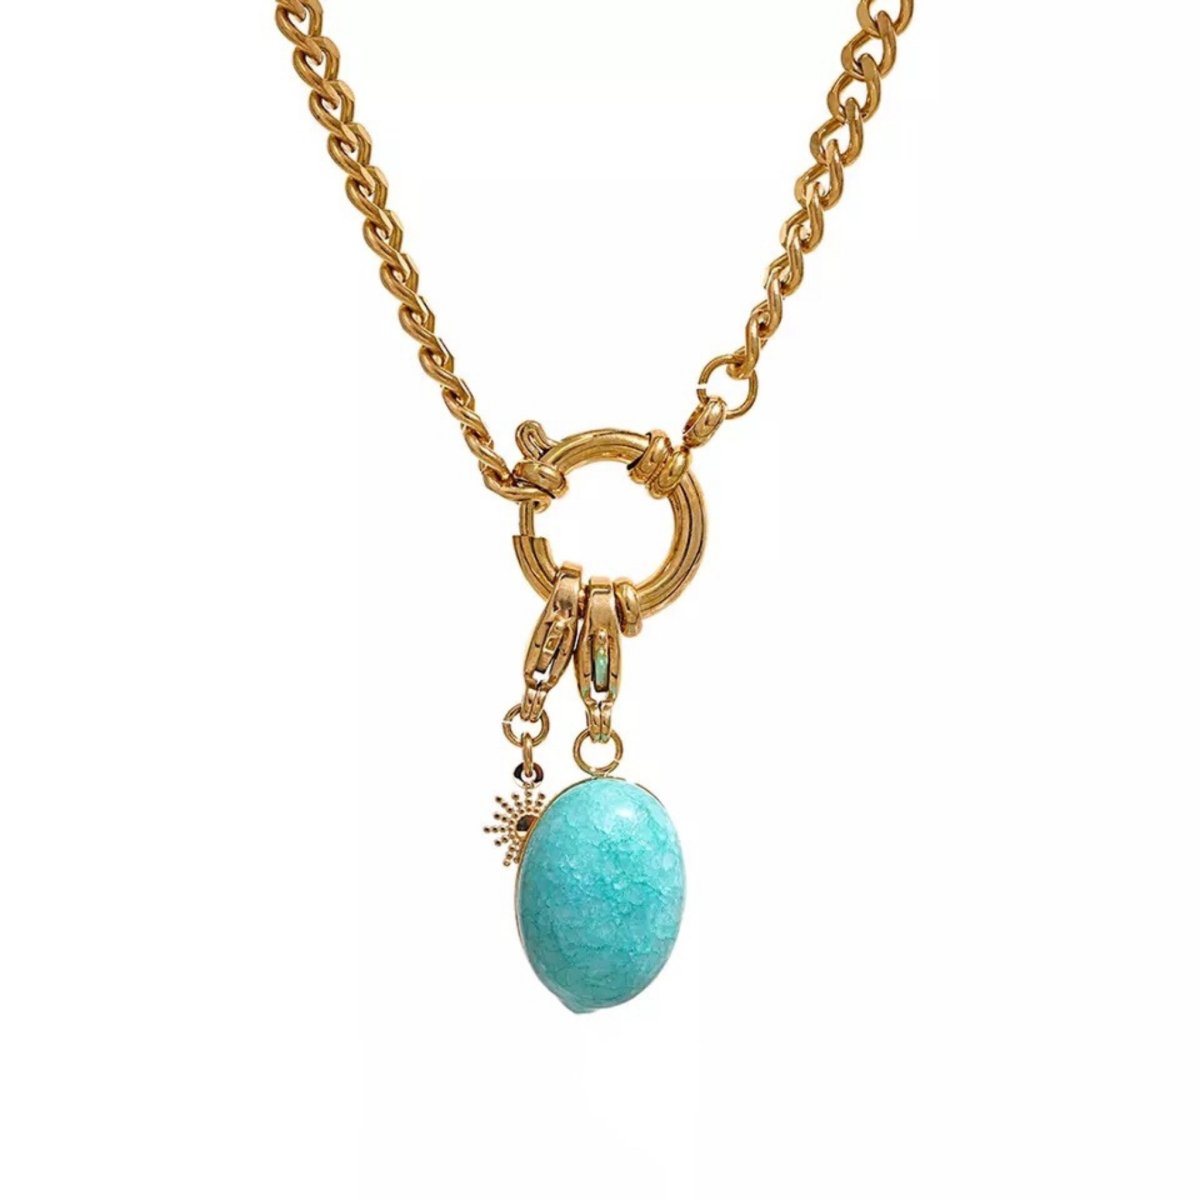 33-37 Chico's Long Faux-Turquoise Rhinestone Charm Necklace Chain